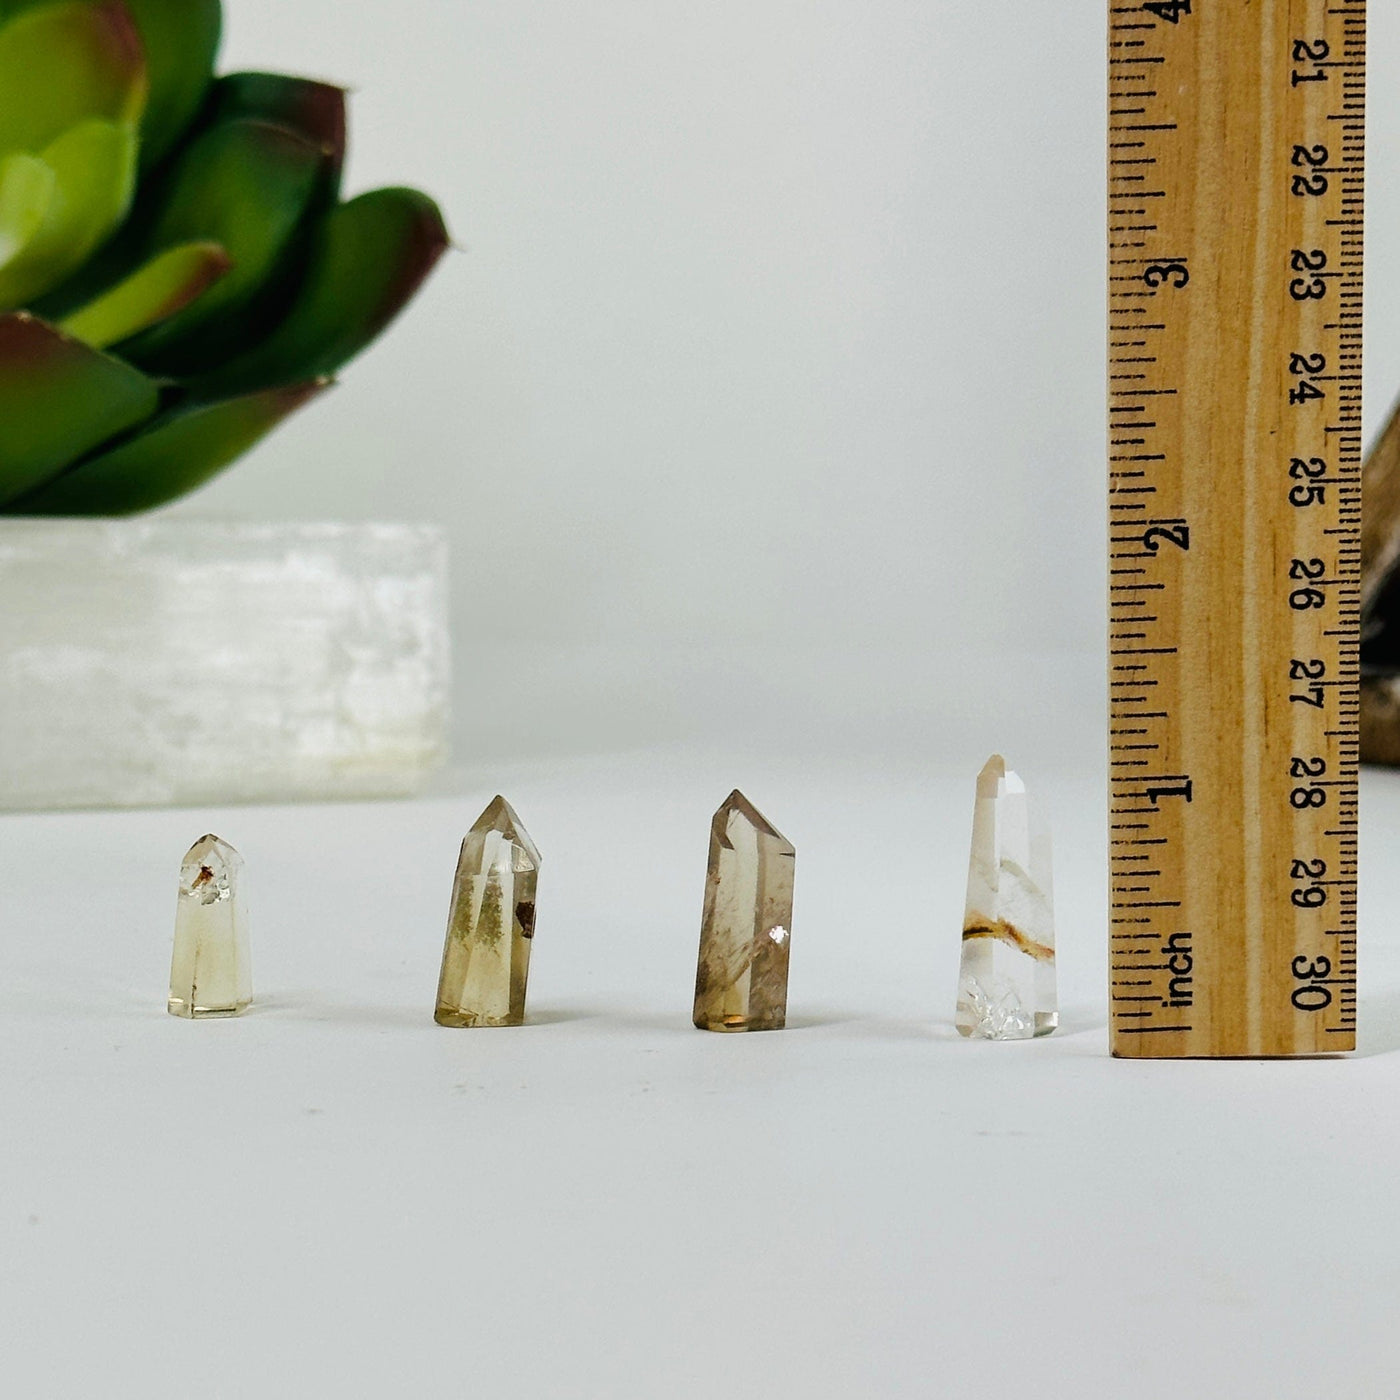 lodalite points next to a ruler for size reference